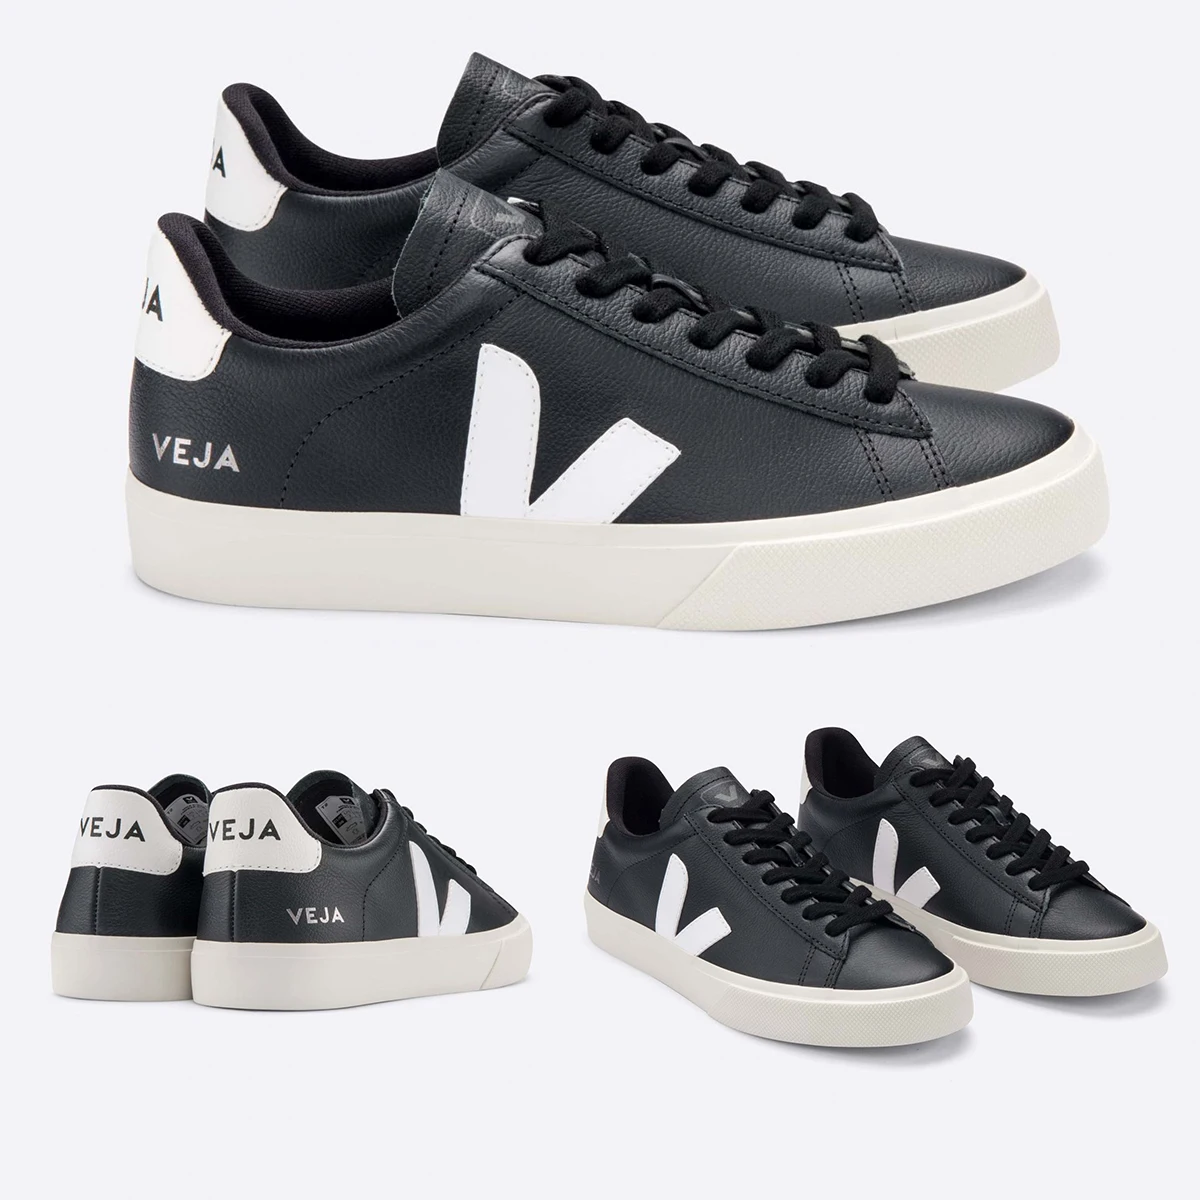 

Original VEJA Campo Womens Sneakers Mens Classic White Shoes Unisex Fashion Couples Veja Shoes Vegetarianism Style Size 36-44